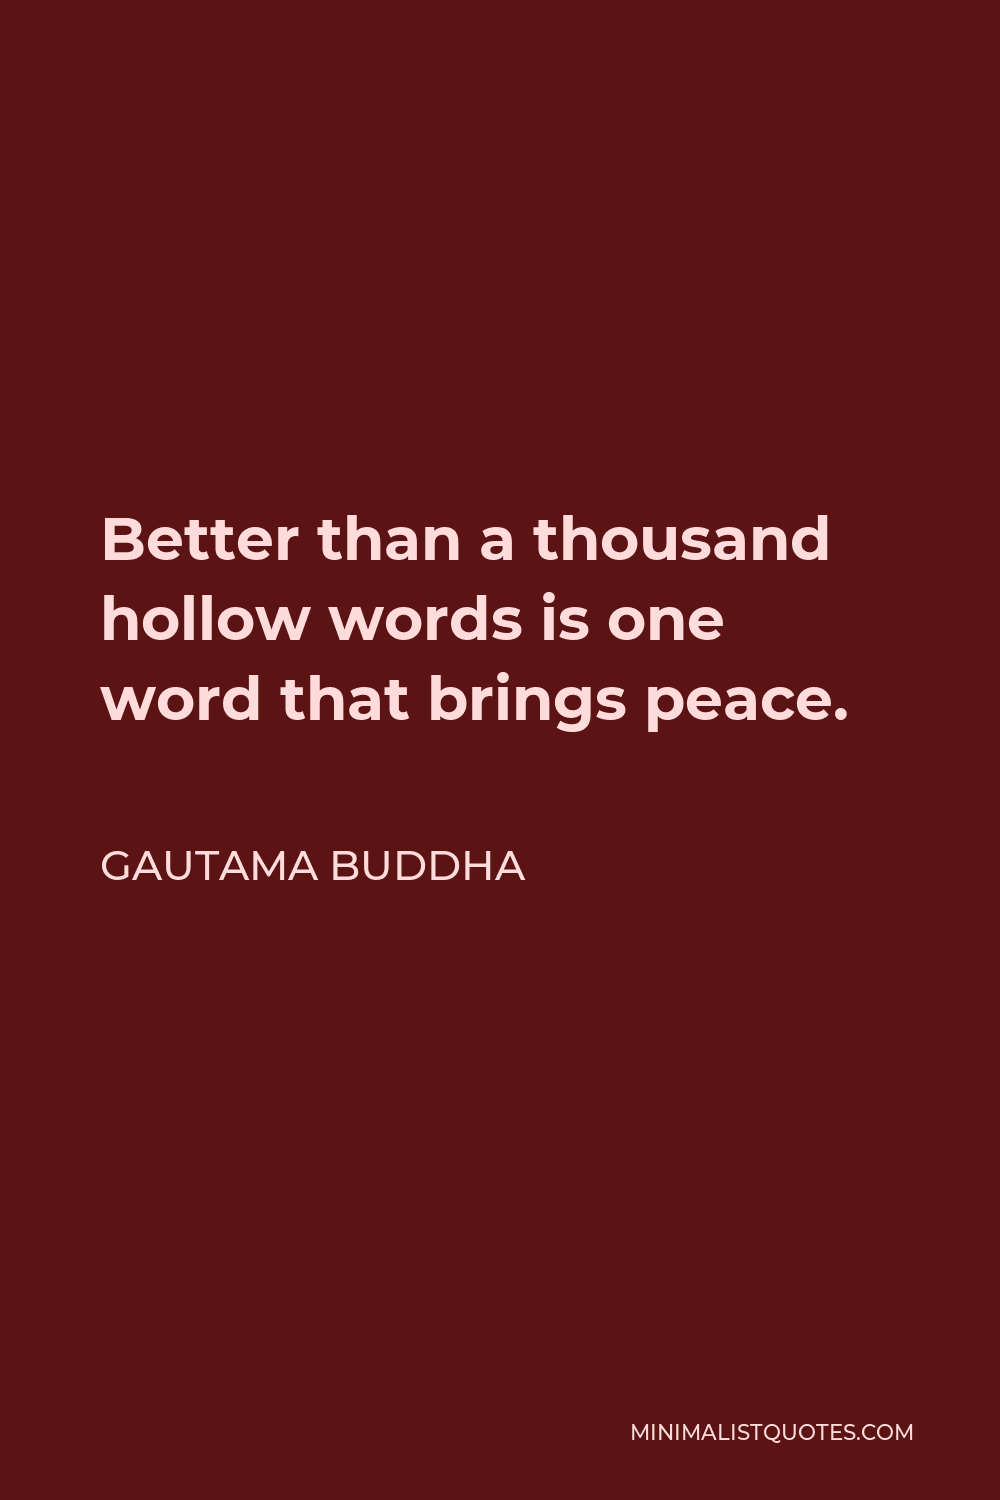 Gautama Buddha Quote - Better than a thousand hollow words is one word that brings peace.